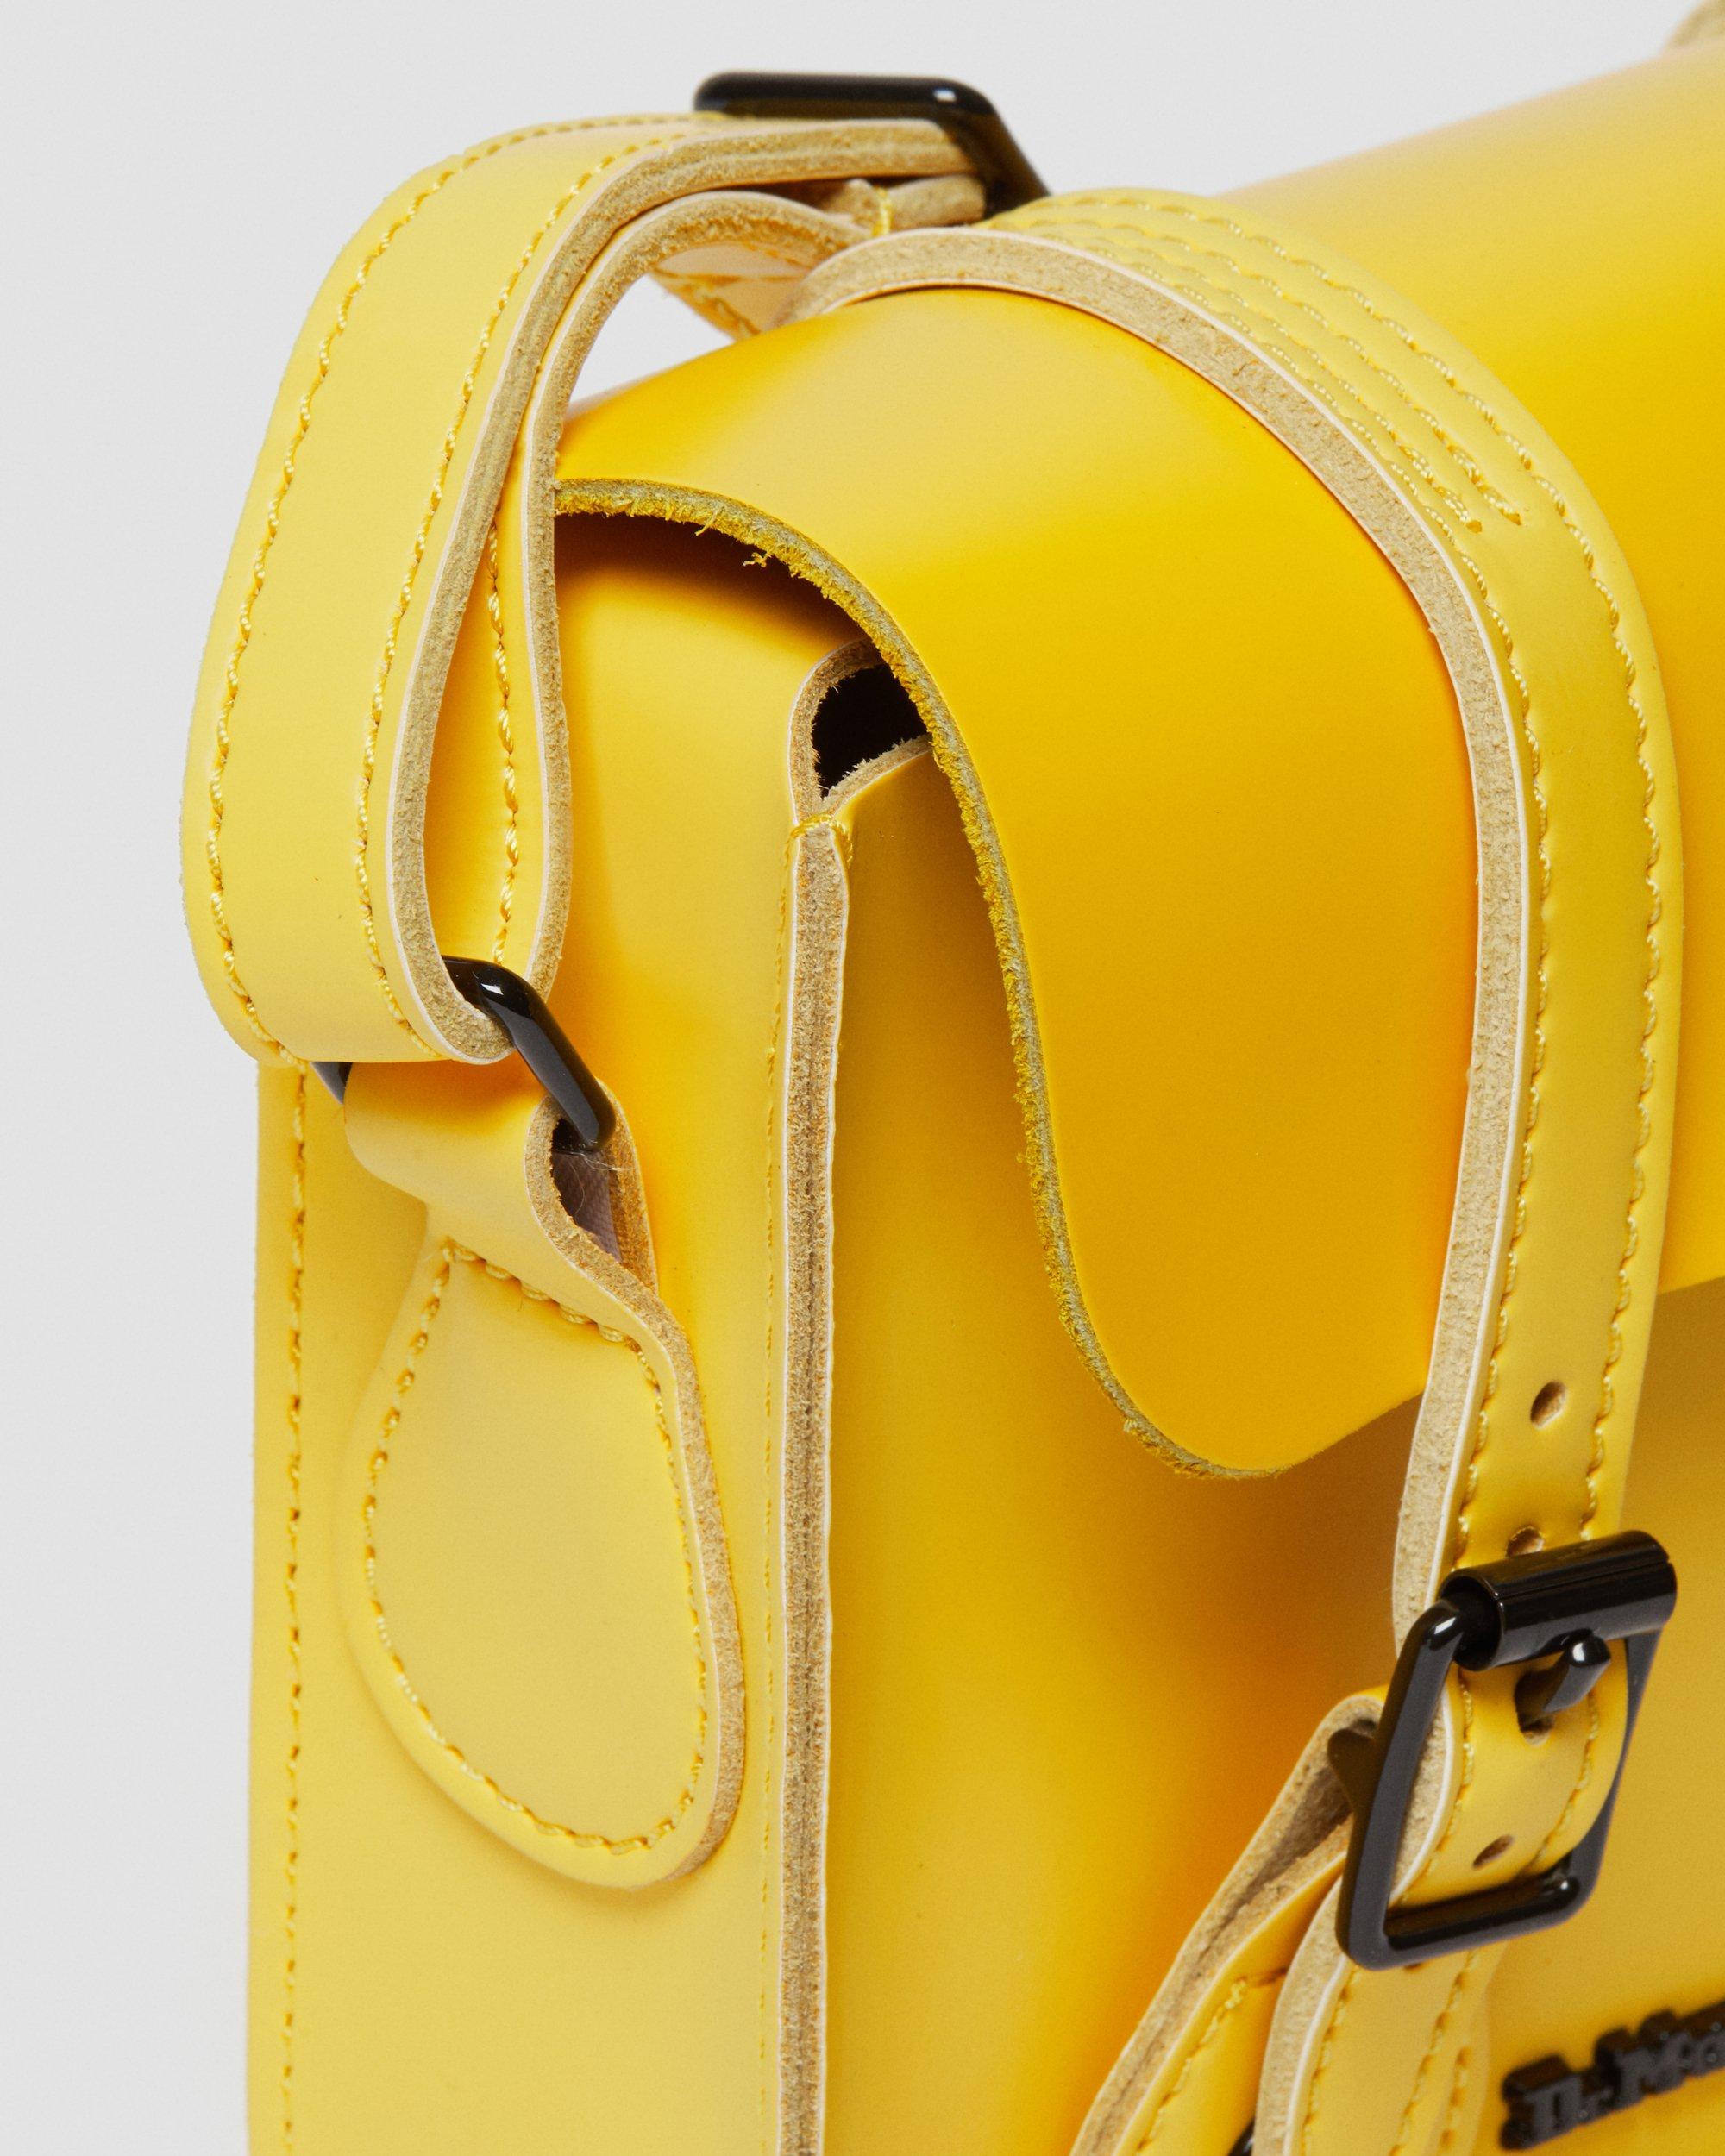 Dr. Martens 7 Inch Leather Crossbody Bag in Yellow for Men